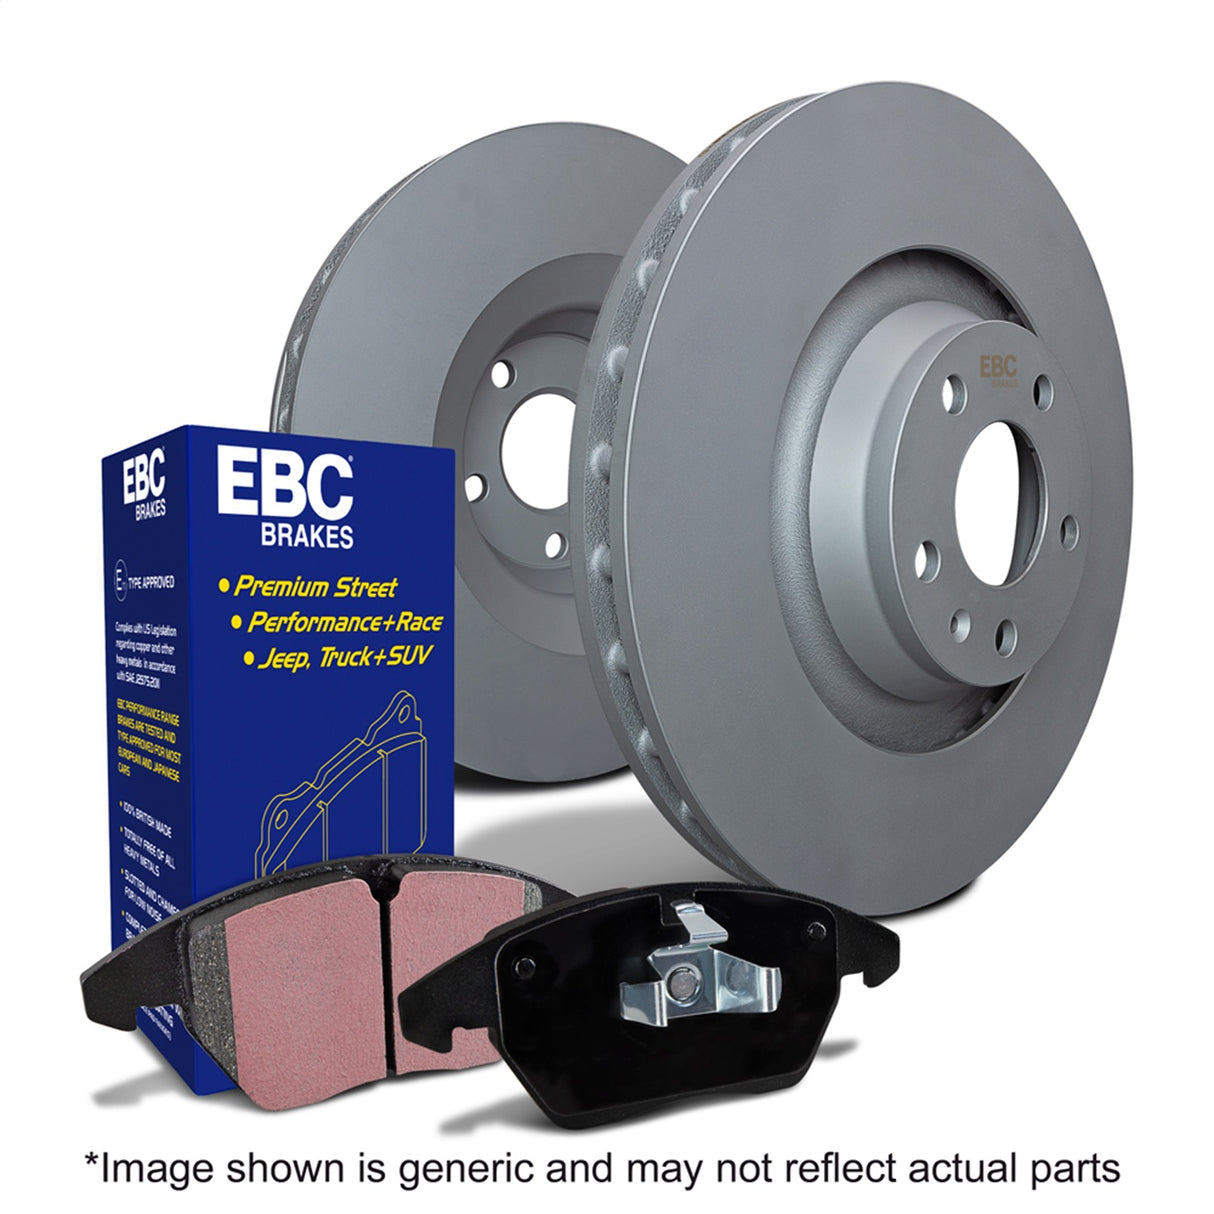 EBC Brakes S20K1265 S20 Kits Ultimax and Plain Rotors - Roam Overland Outfitters